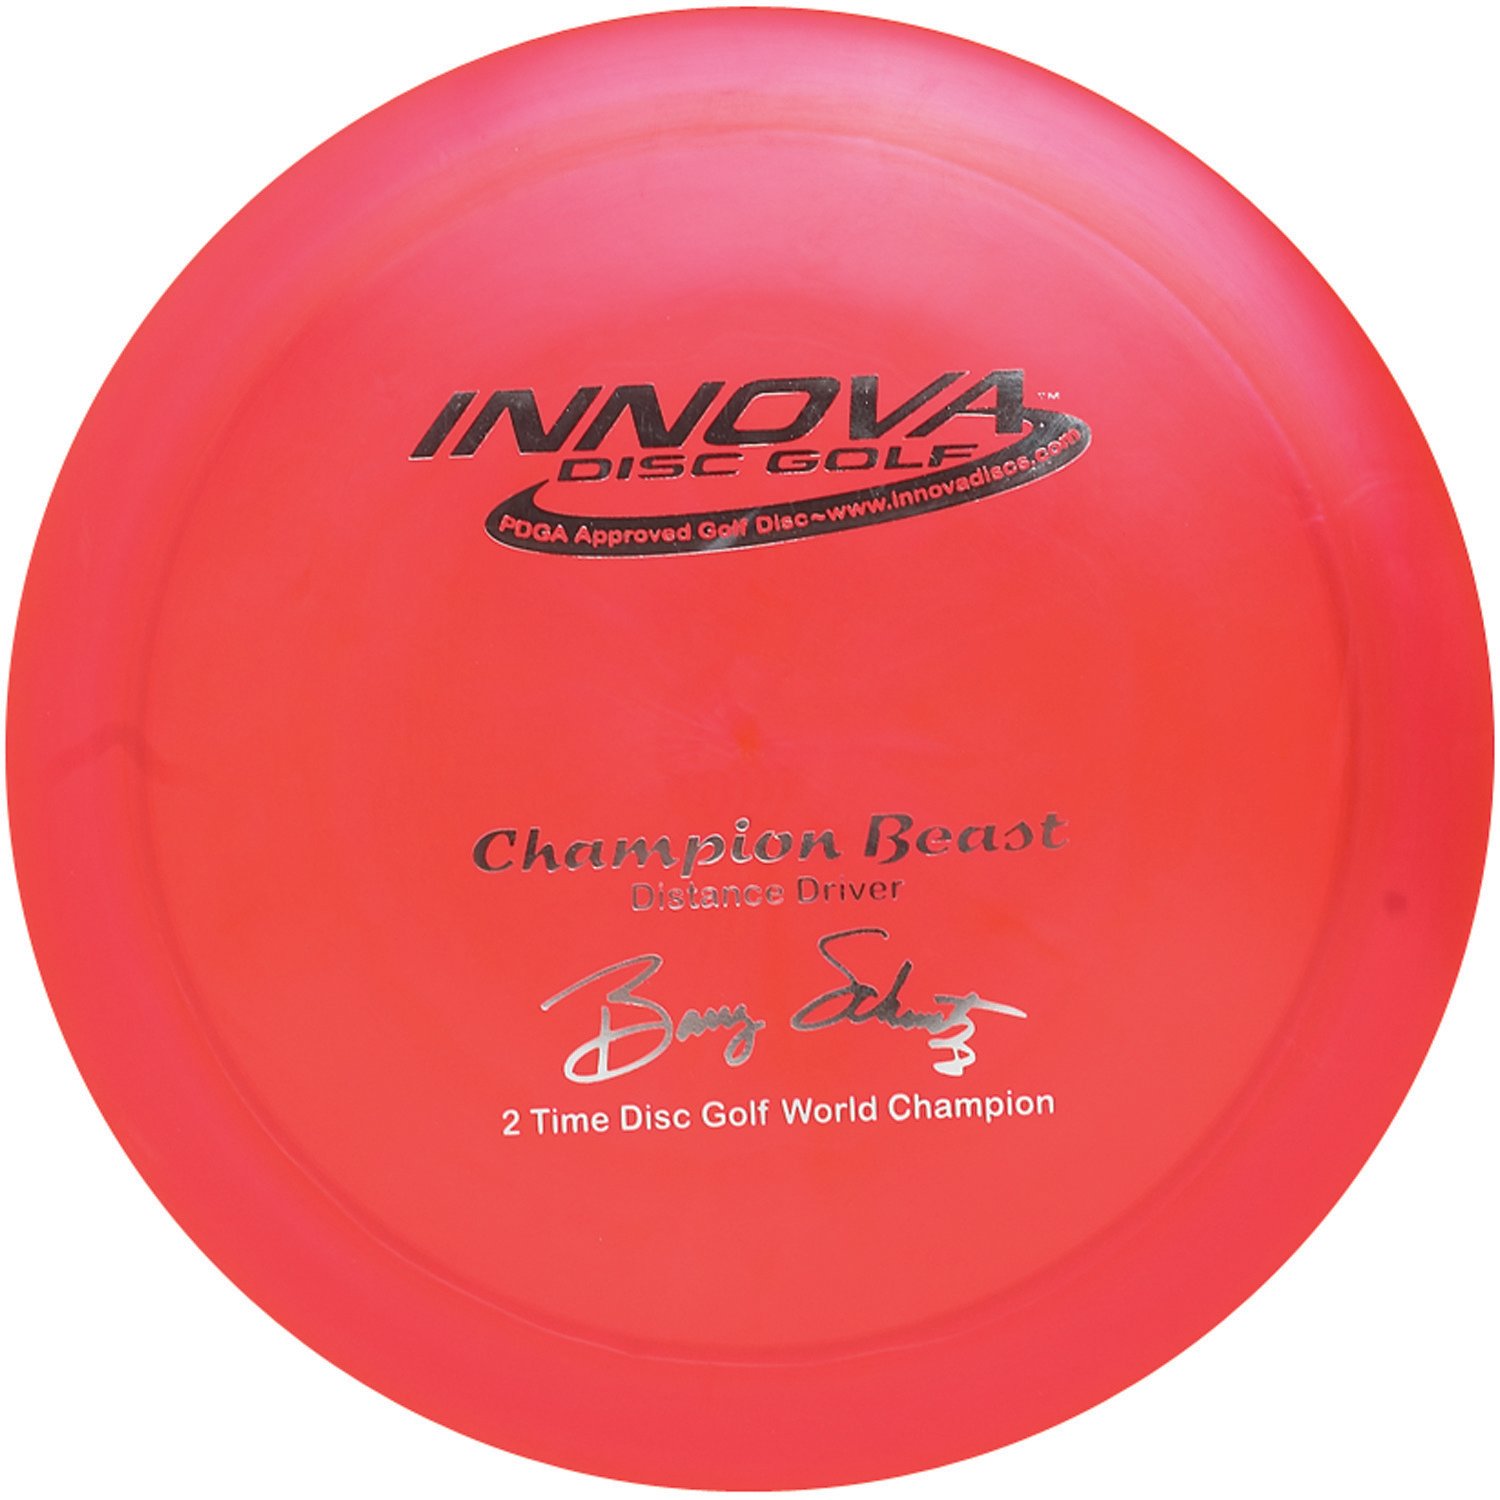 Innova Disc Golf Champion Beast Driver                                                                                           - view number 1 selected